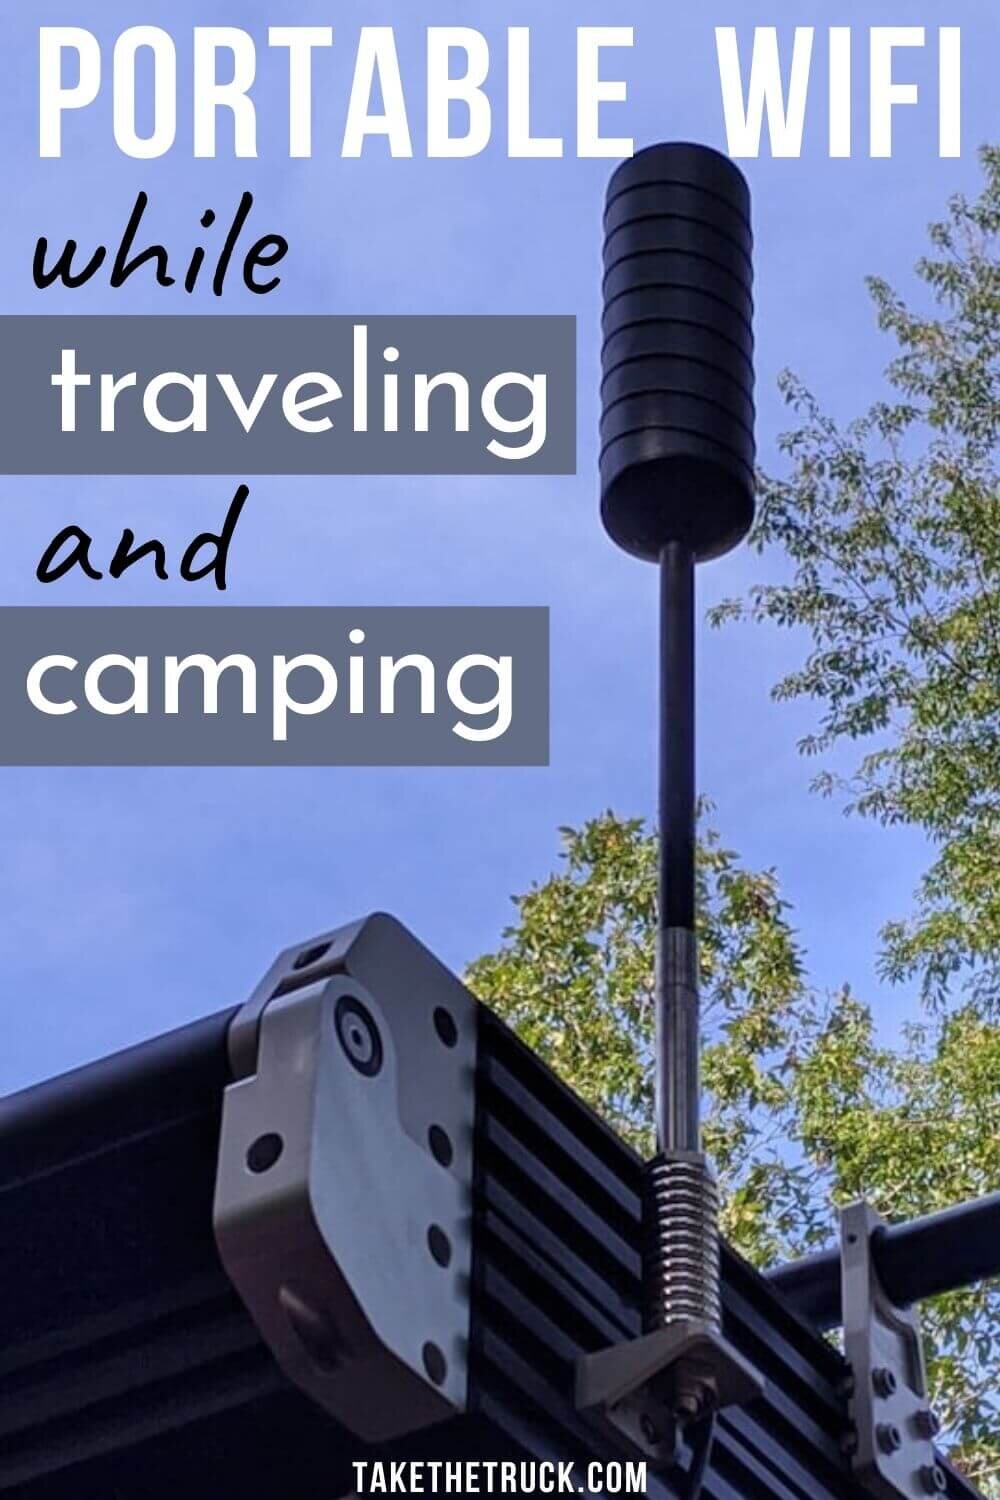 Read this if you need wifi while camping! Finally, we've found a portable camping wifi antenne and cell signal booster that helps provide wifi while traveling, camping, or RVing!